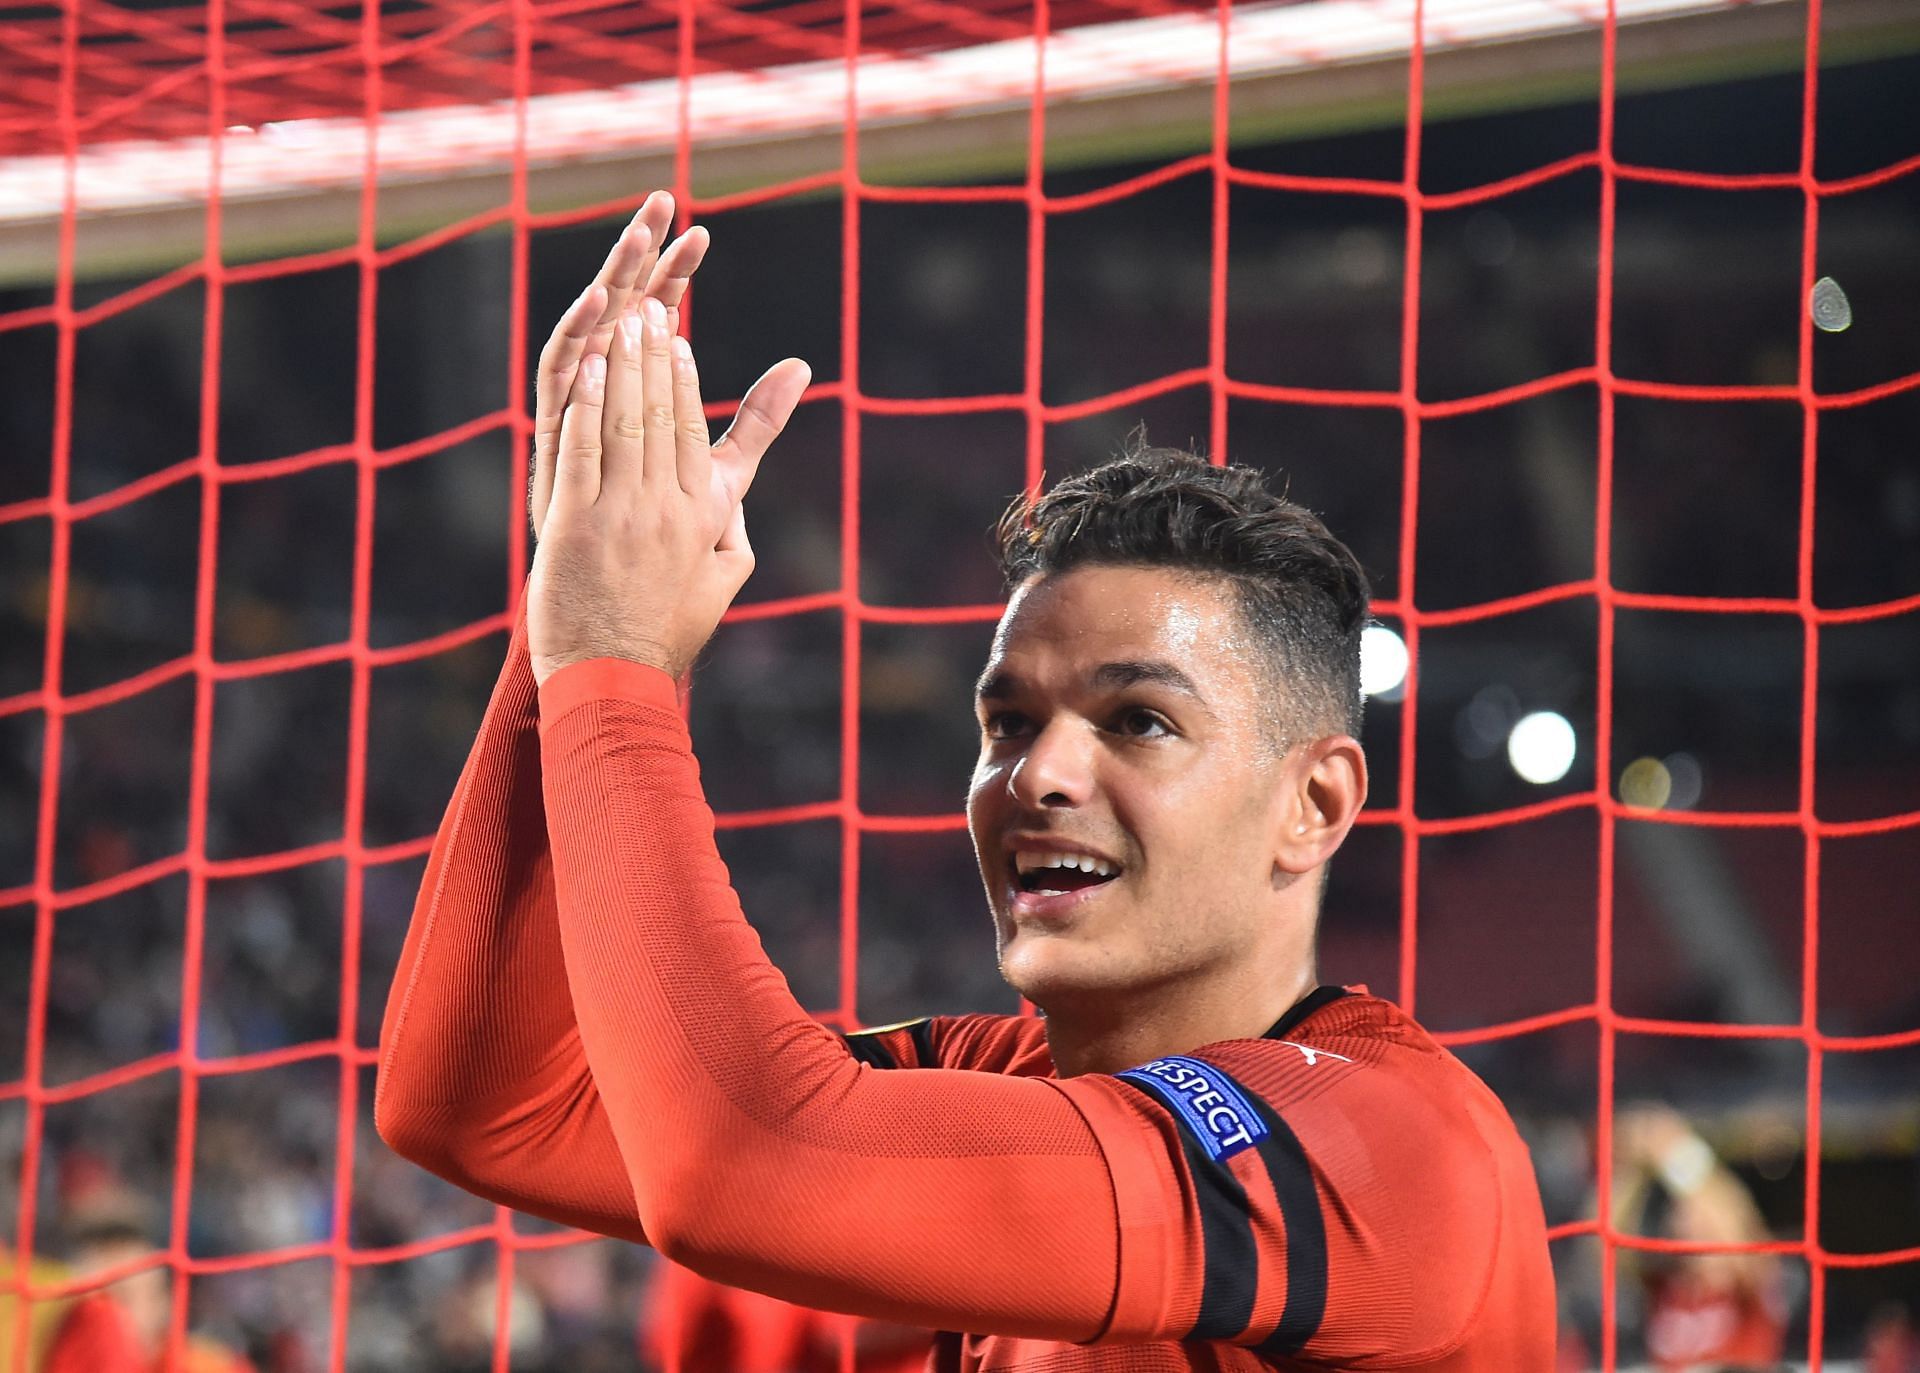 Ben Arfa joined Lille in Janaury as a free agent